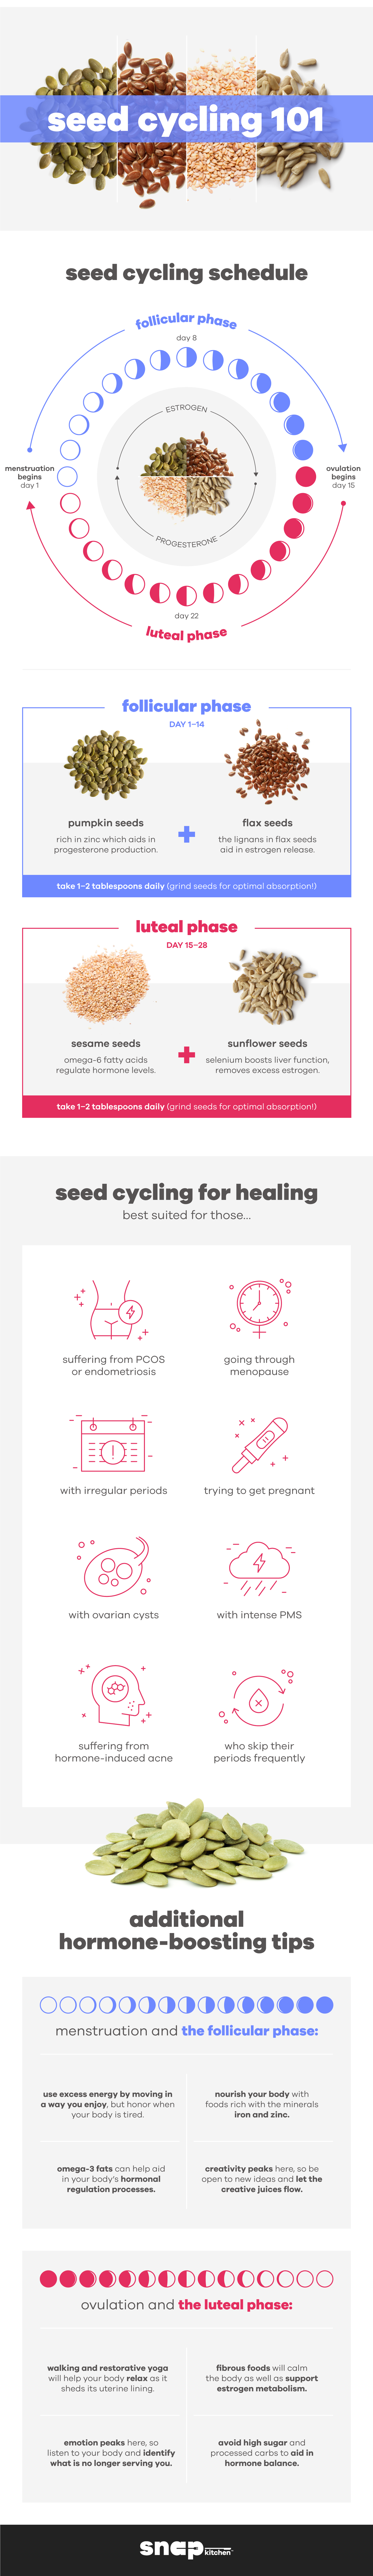 seed cycling hormone health